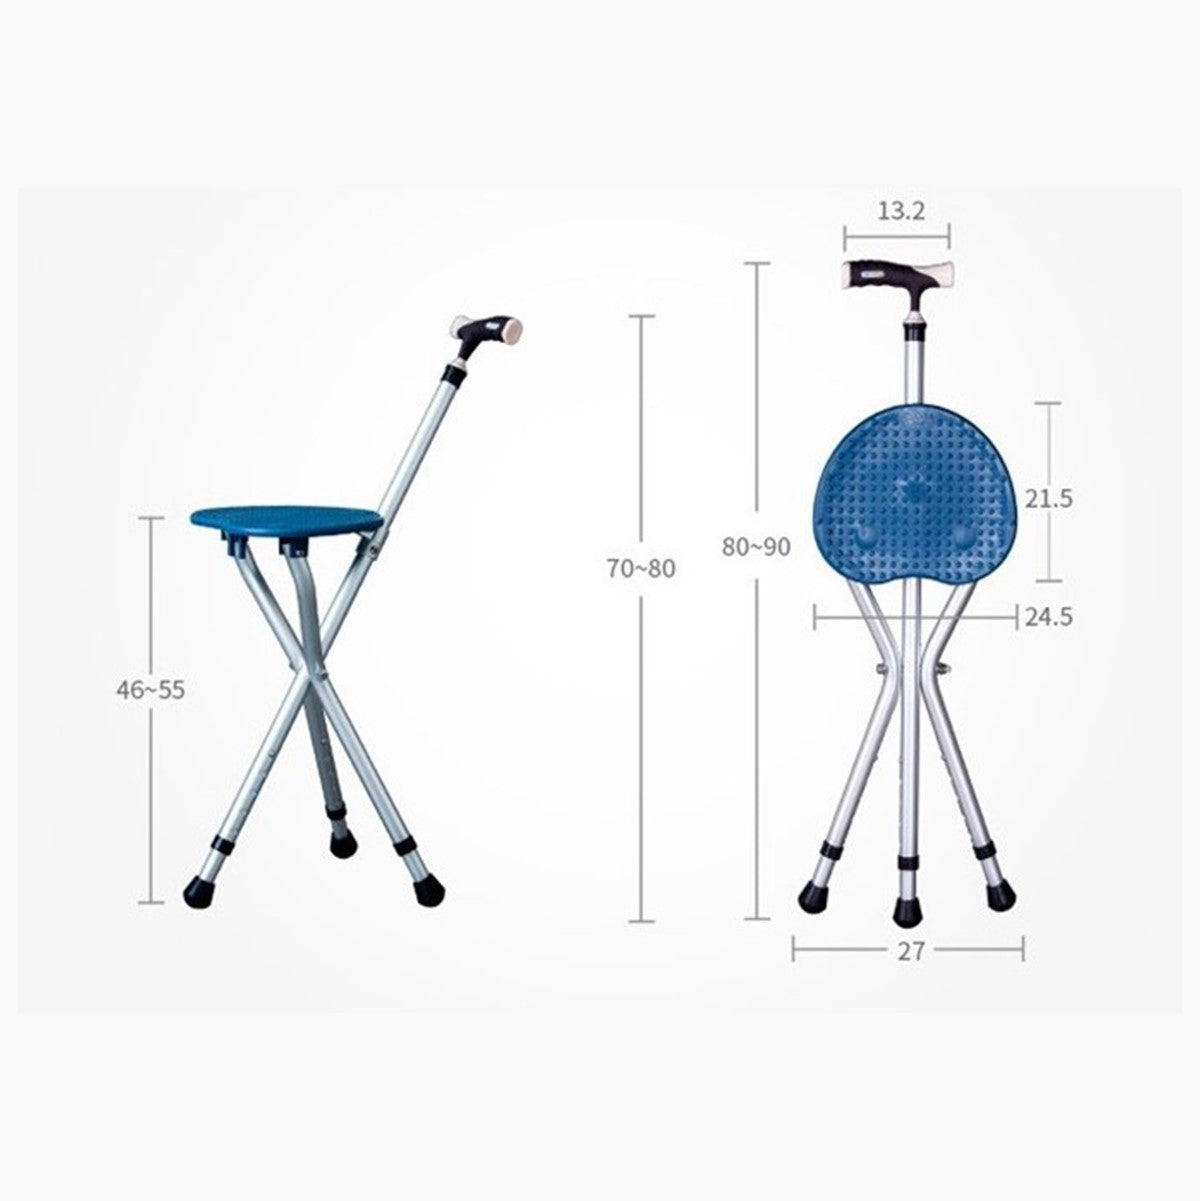 Foldable Walking Stick with Height Adjustment and LED Lighting and Seat Pad